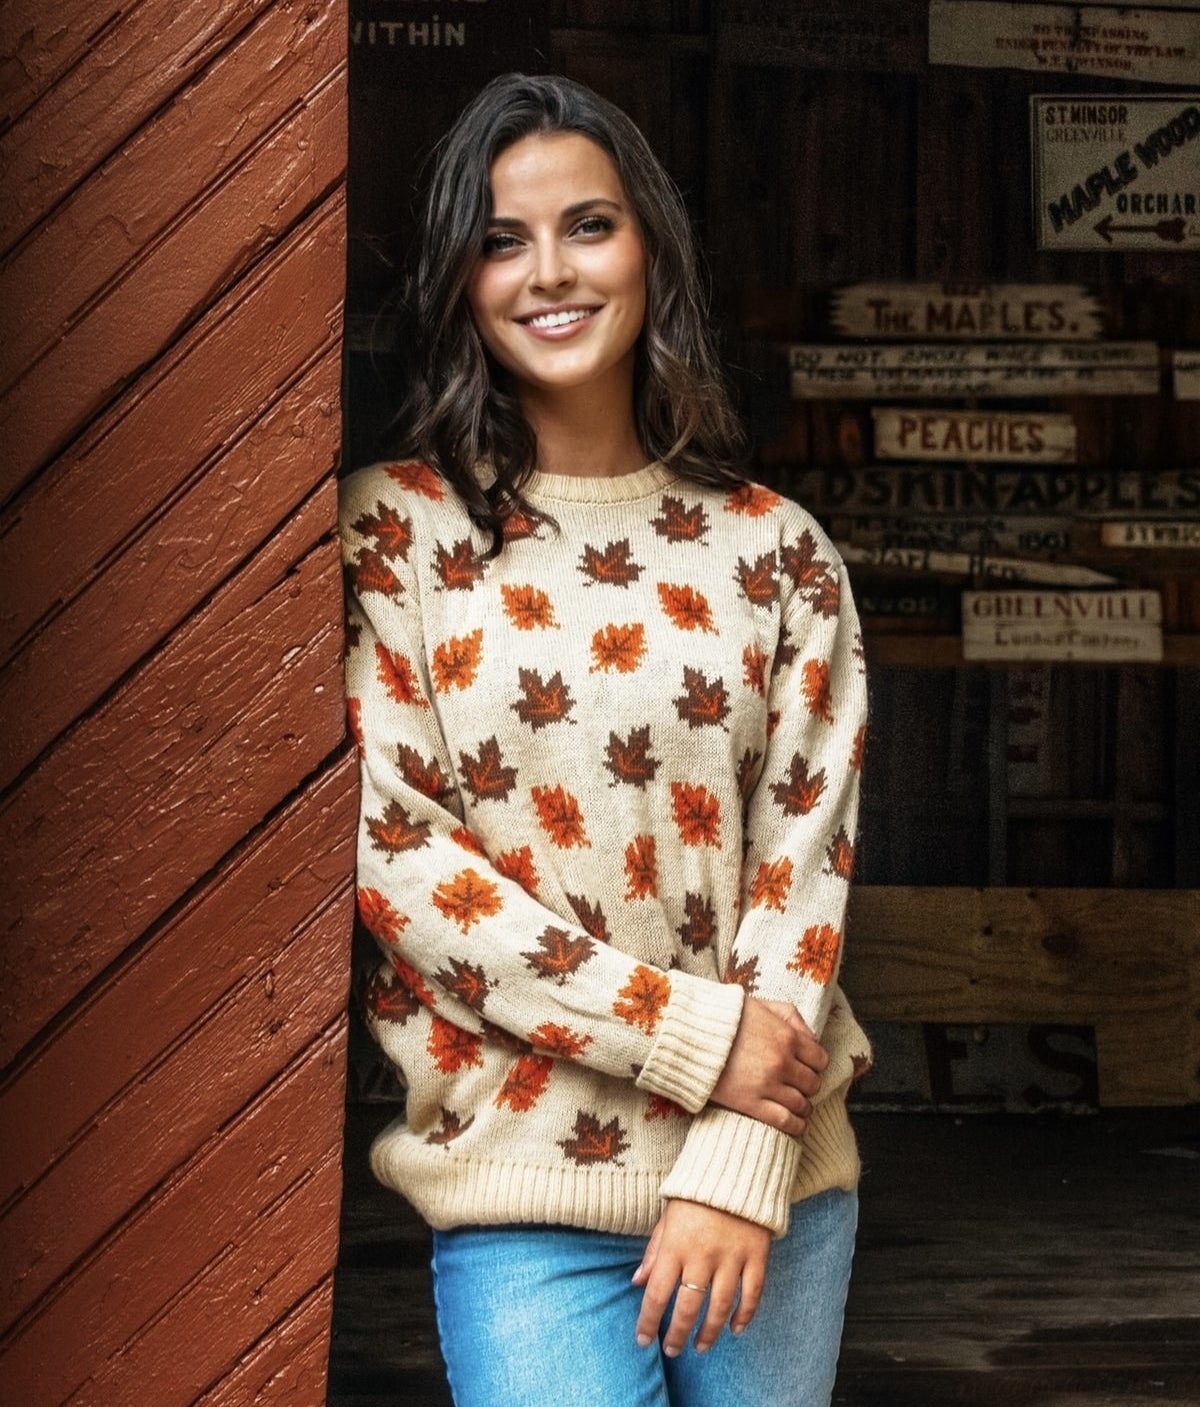 Model is wearing a cream colored sweater with orange and brown leaves printed on it